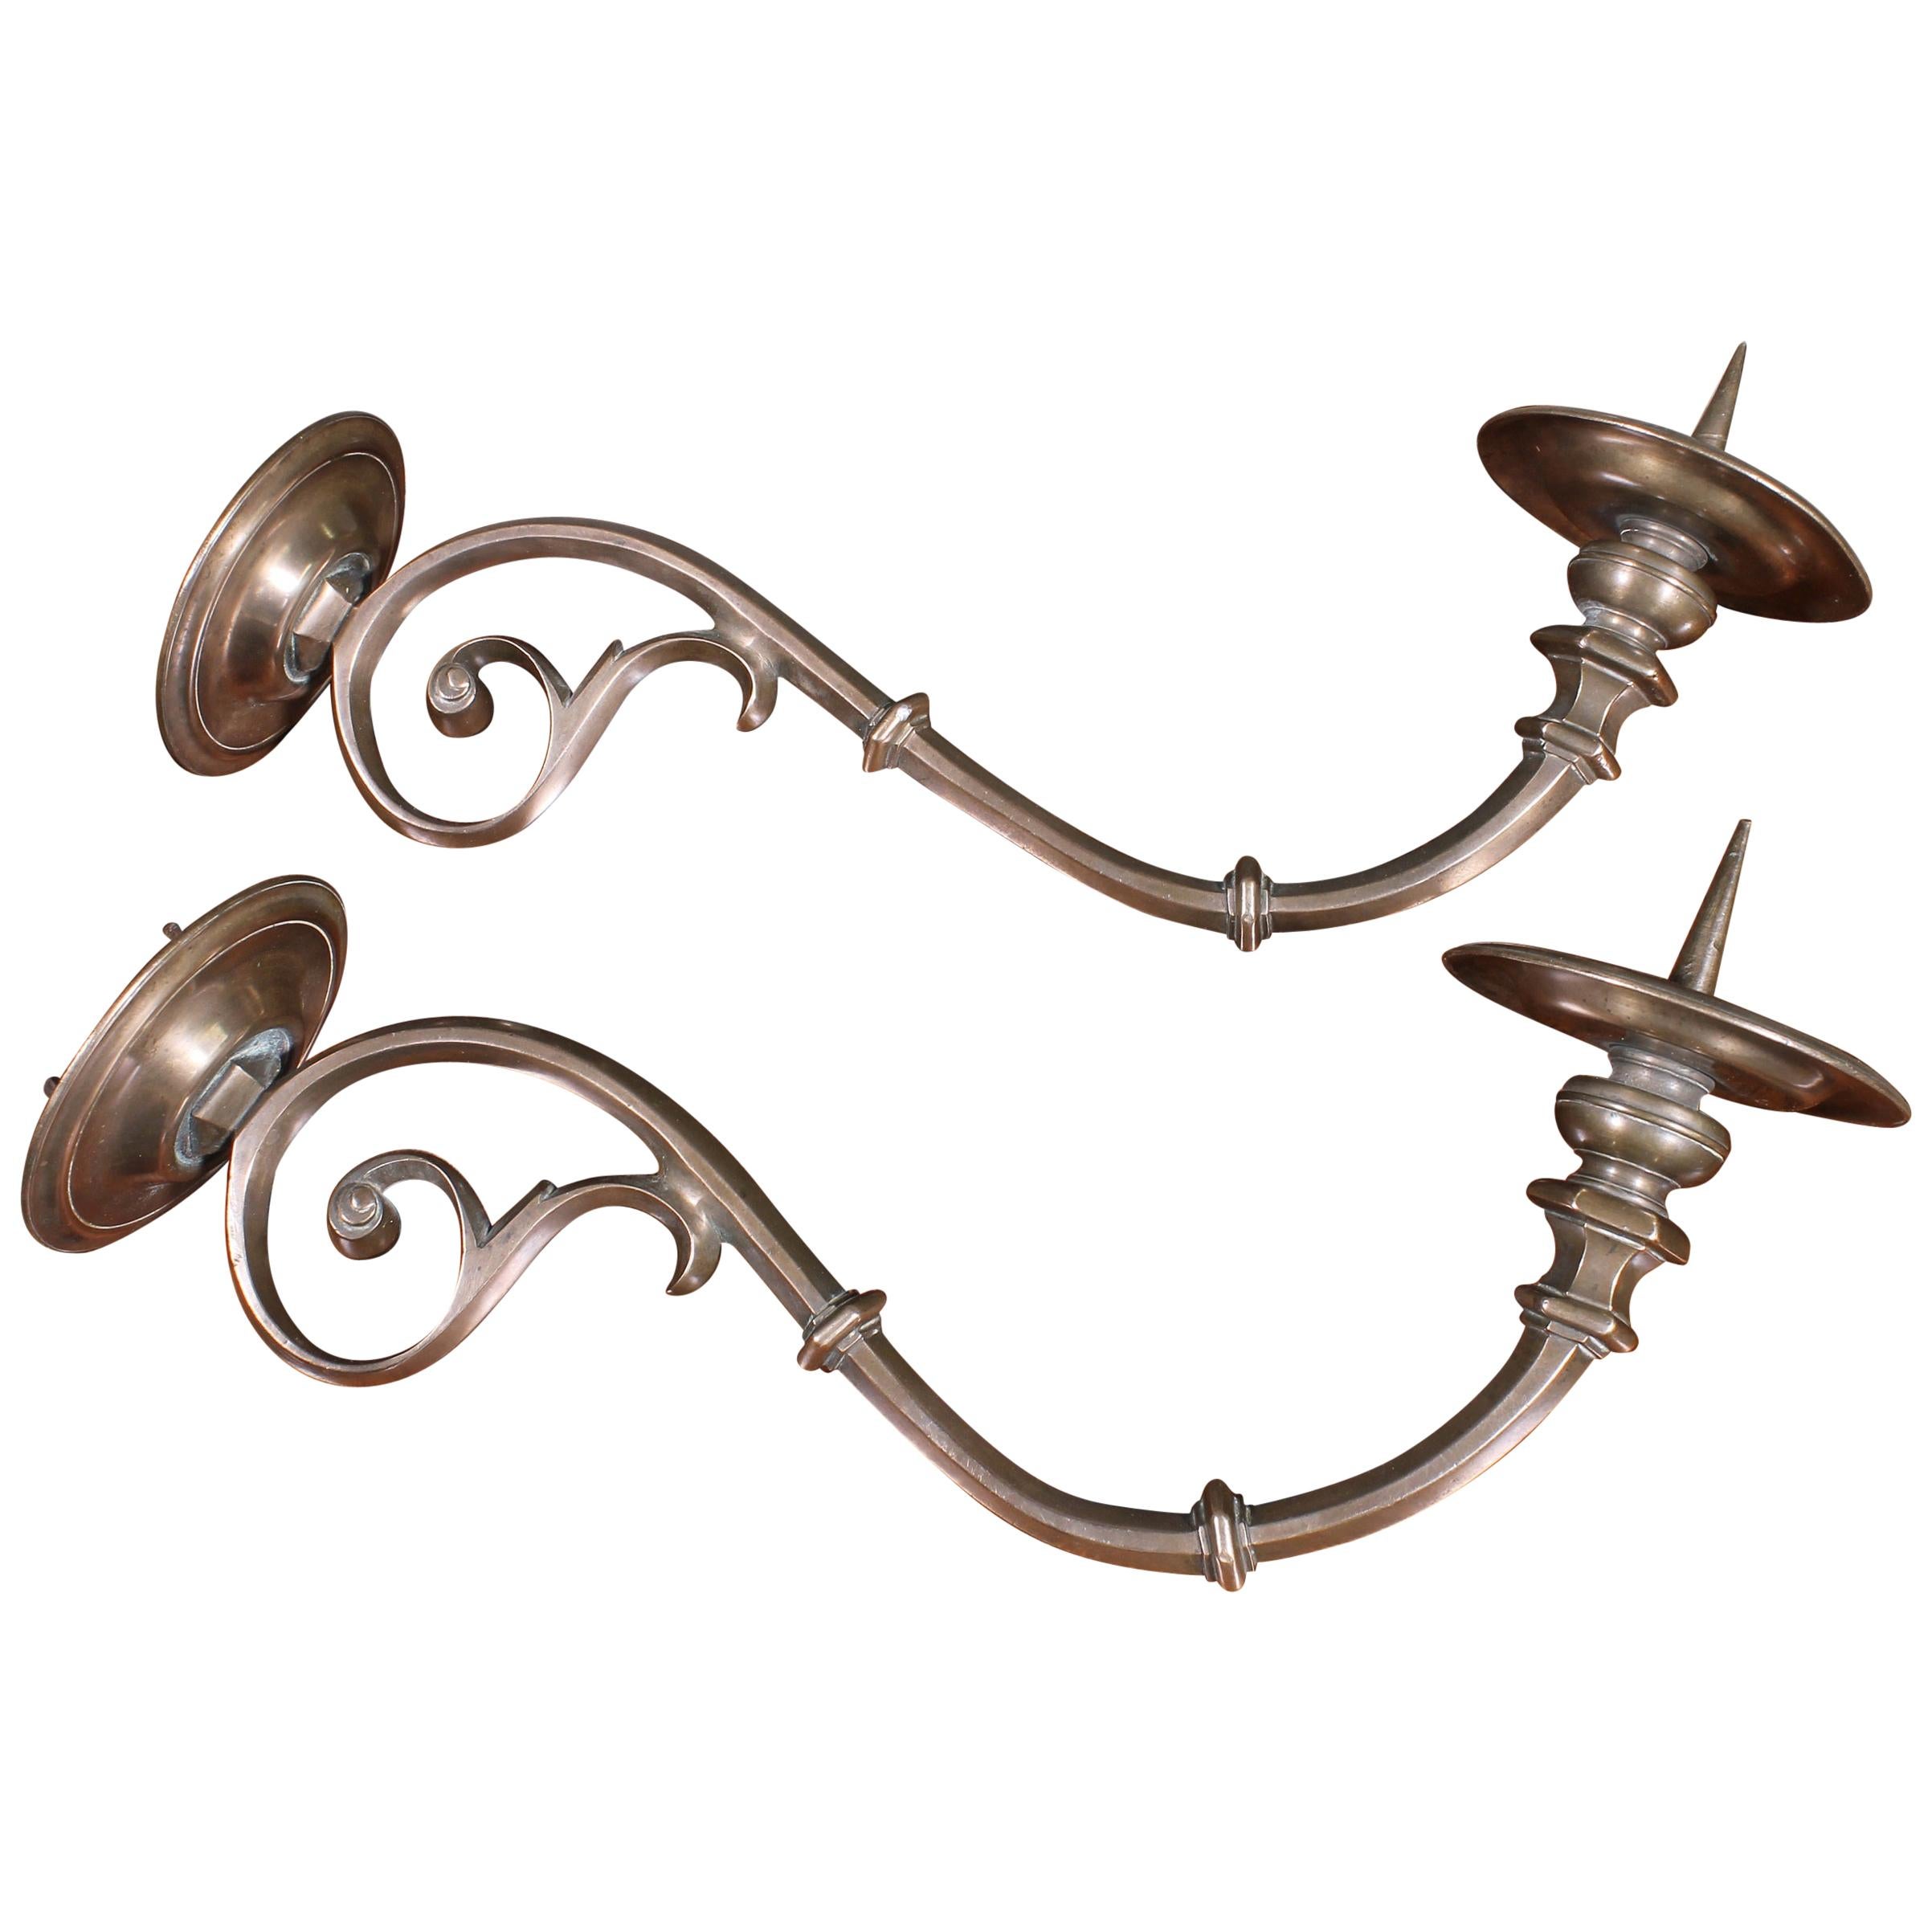 Pair of Italian Wall Lights in Bronze, 17th Century For Sale